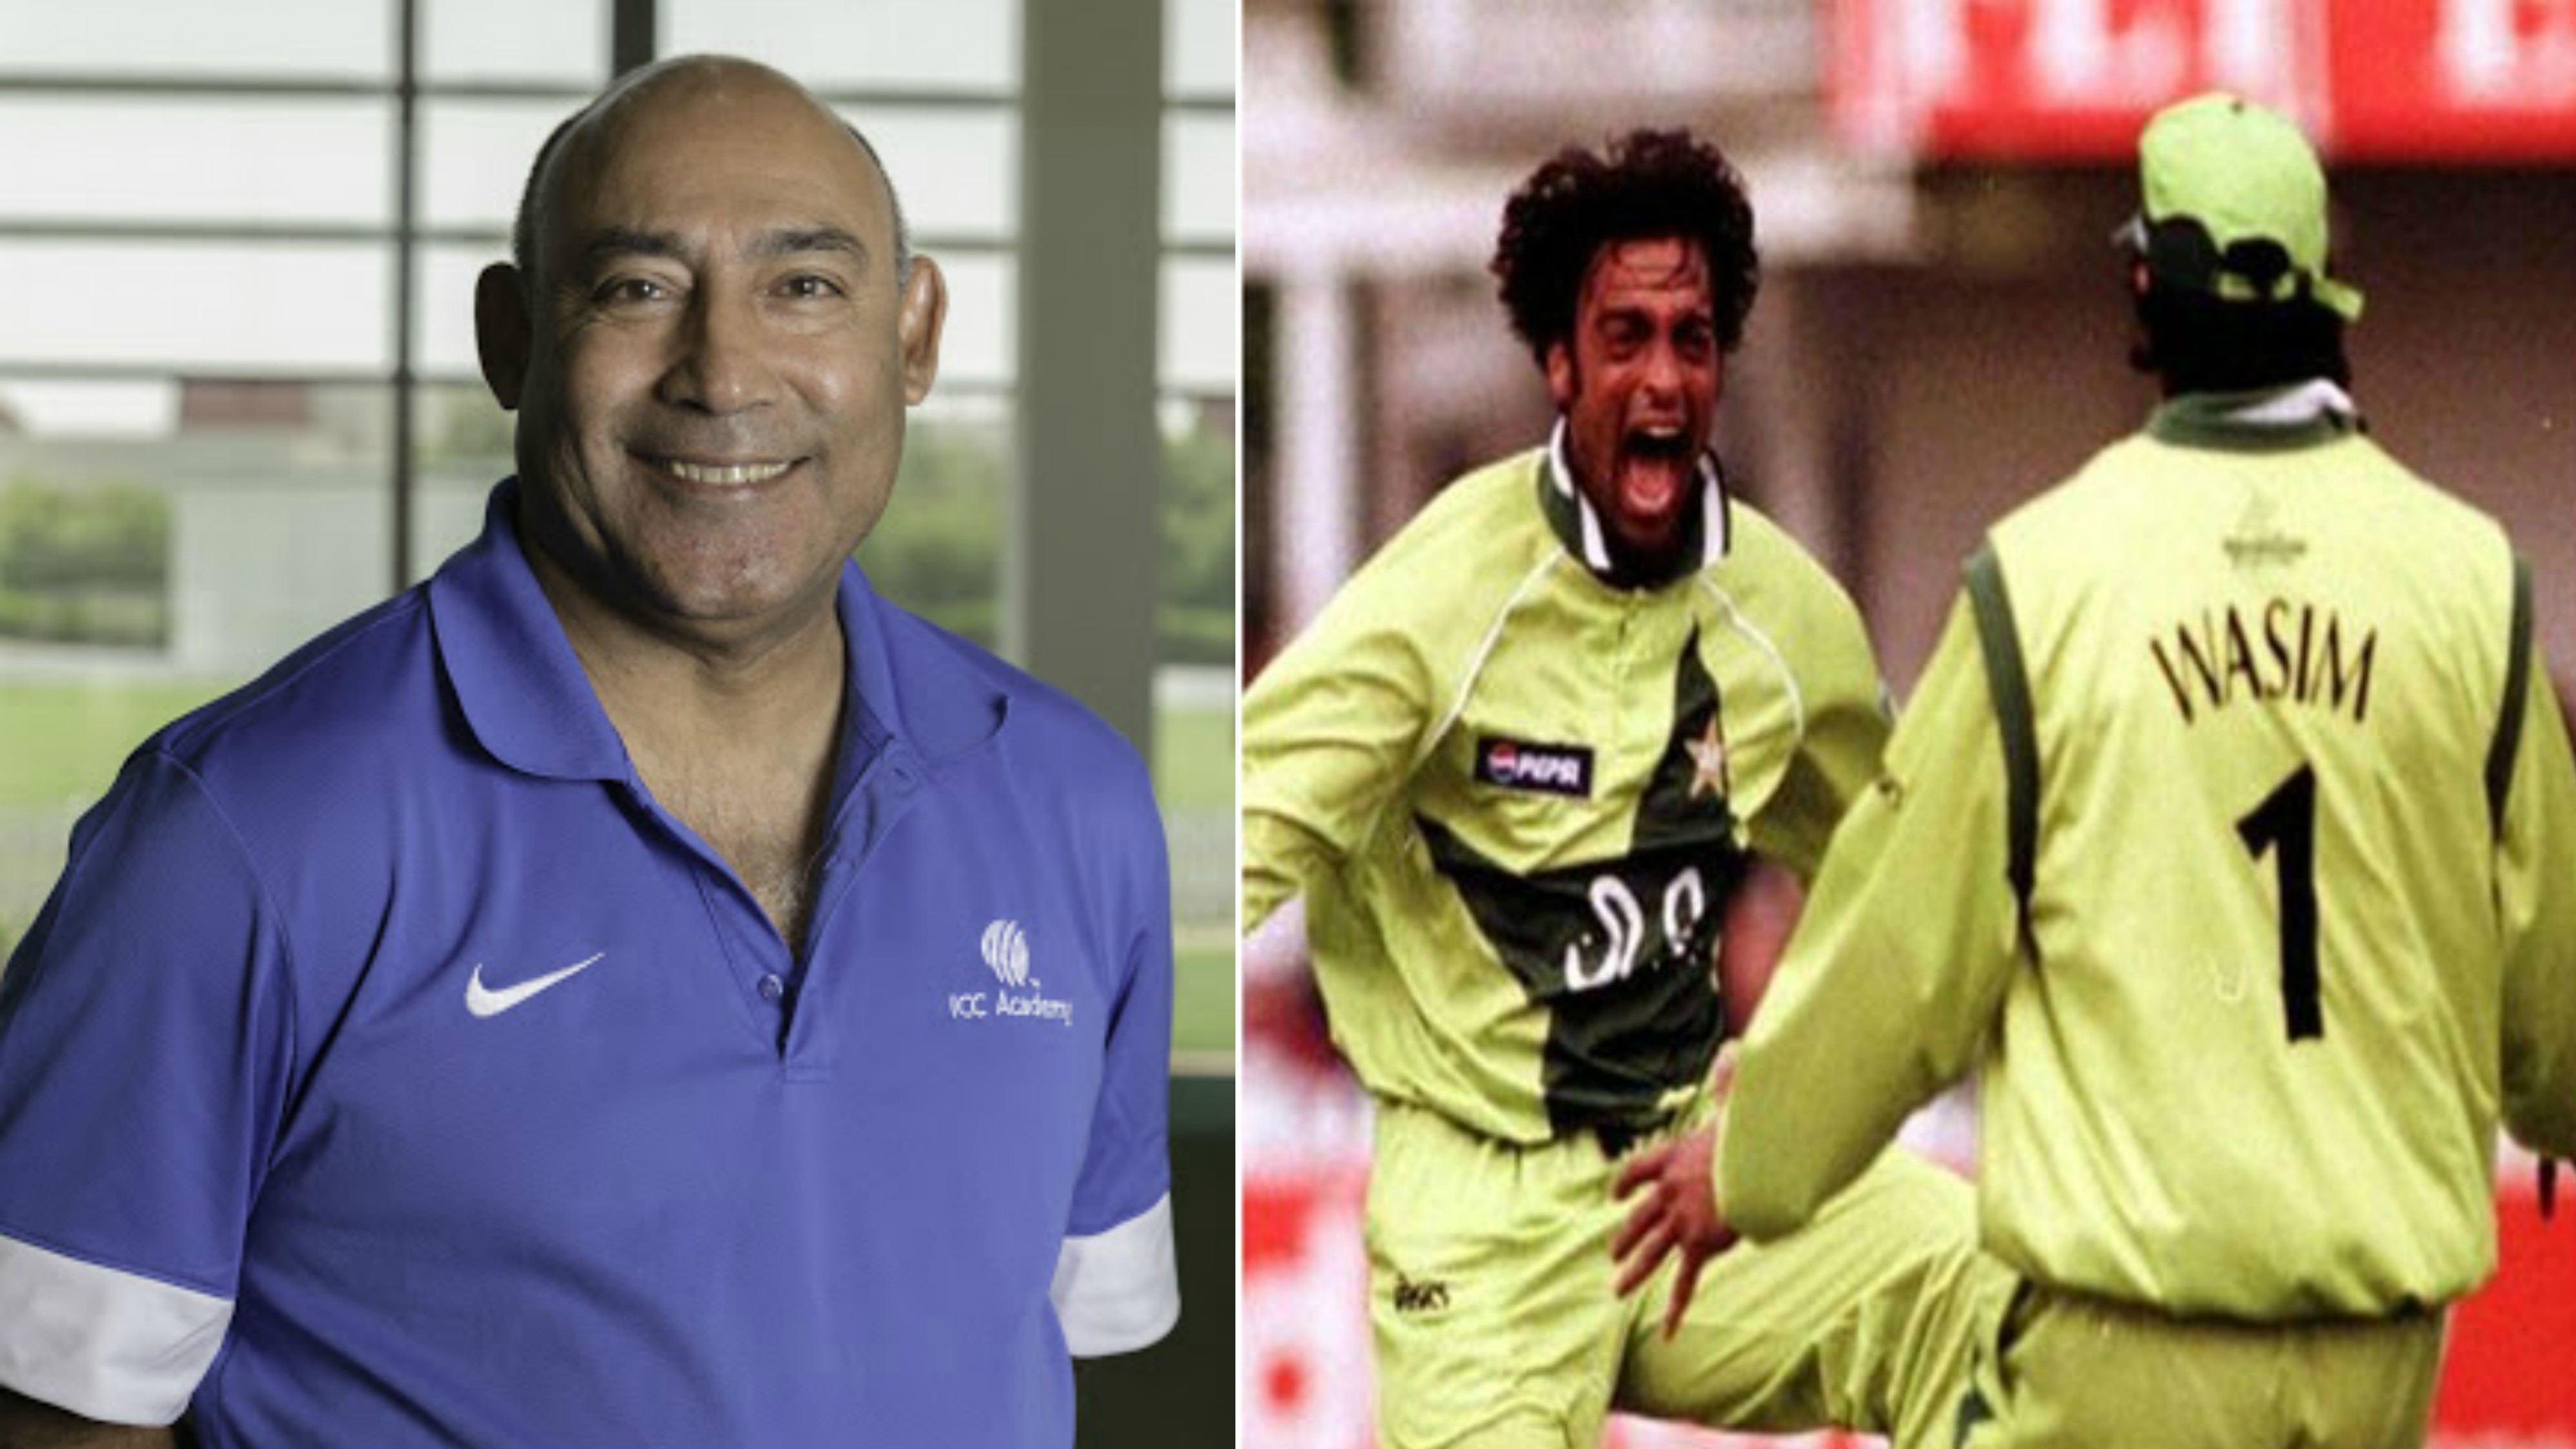 ENG v PAK 2020: Pakistan players of 90s would've fight each other in bio-bubble, says Mudassar Nazar